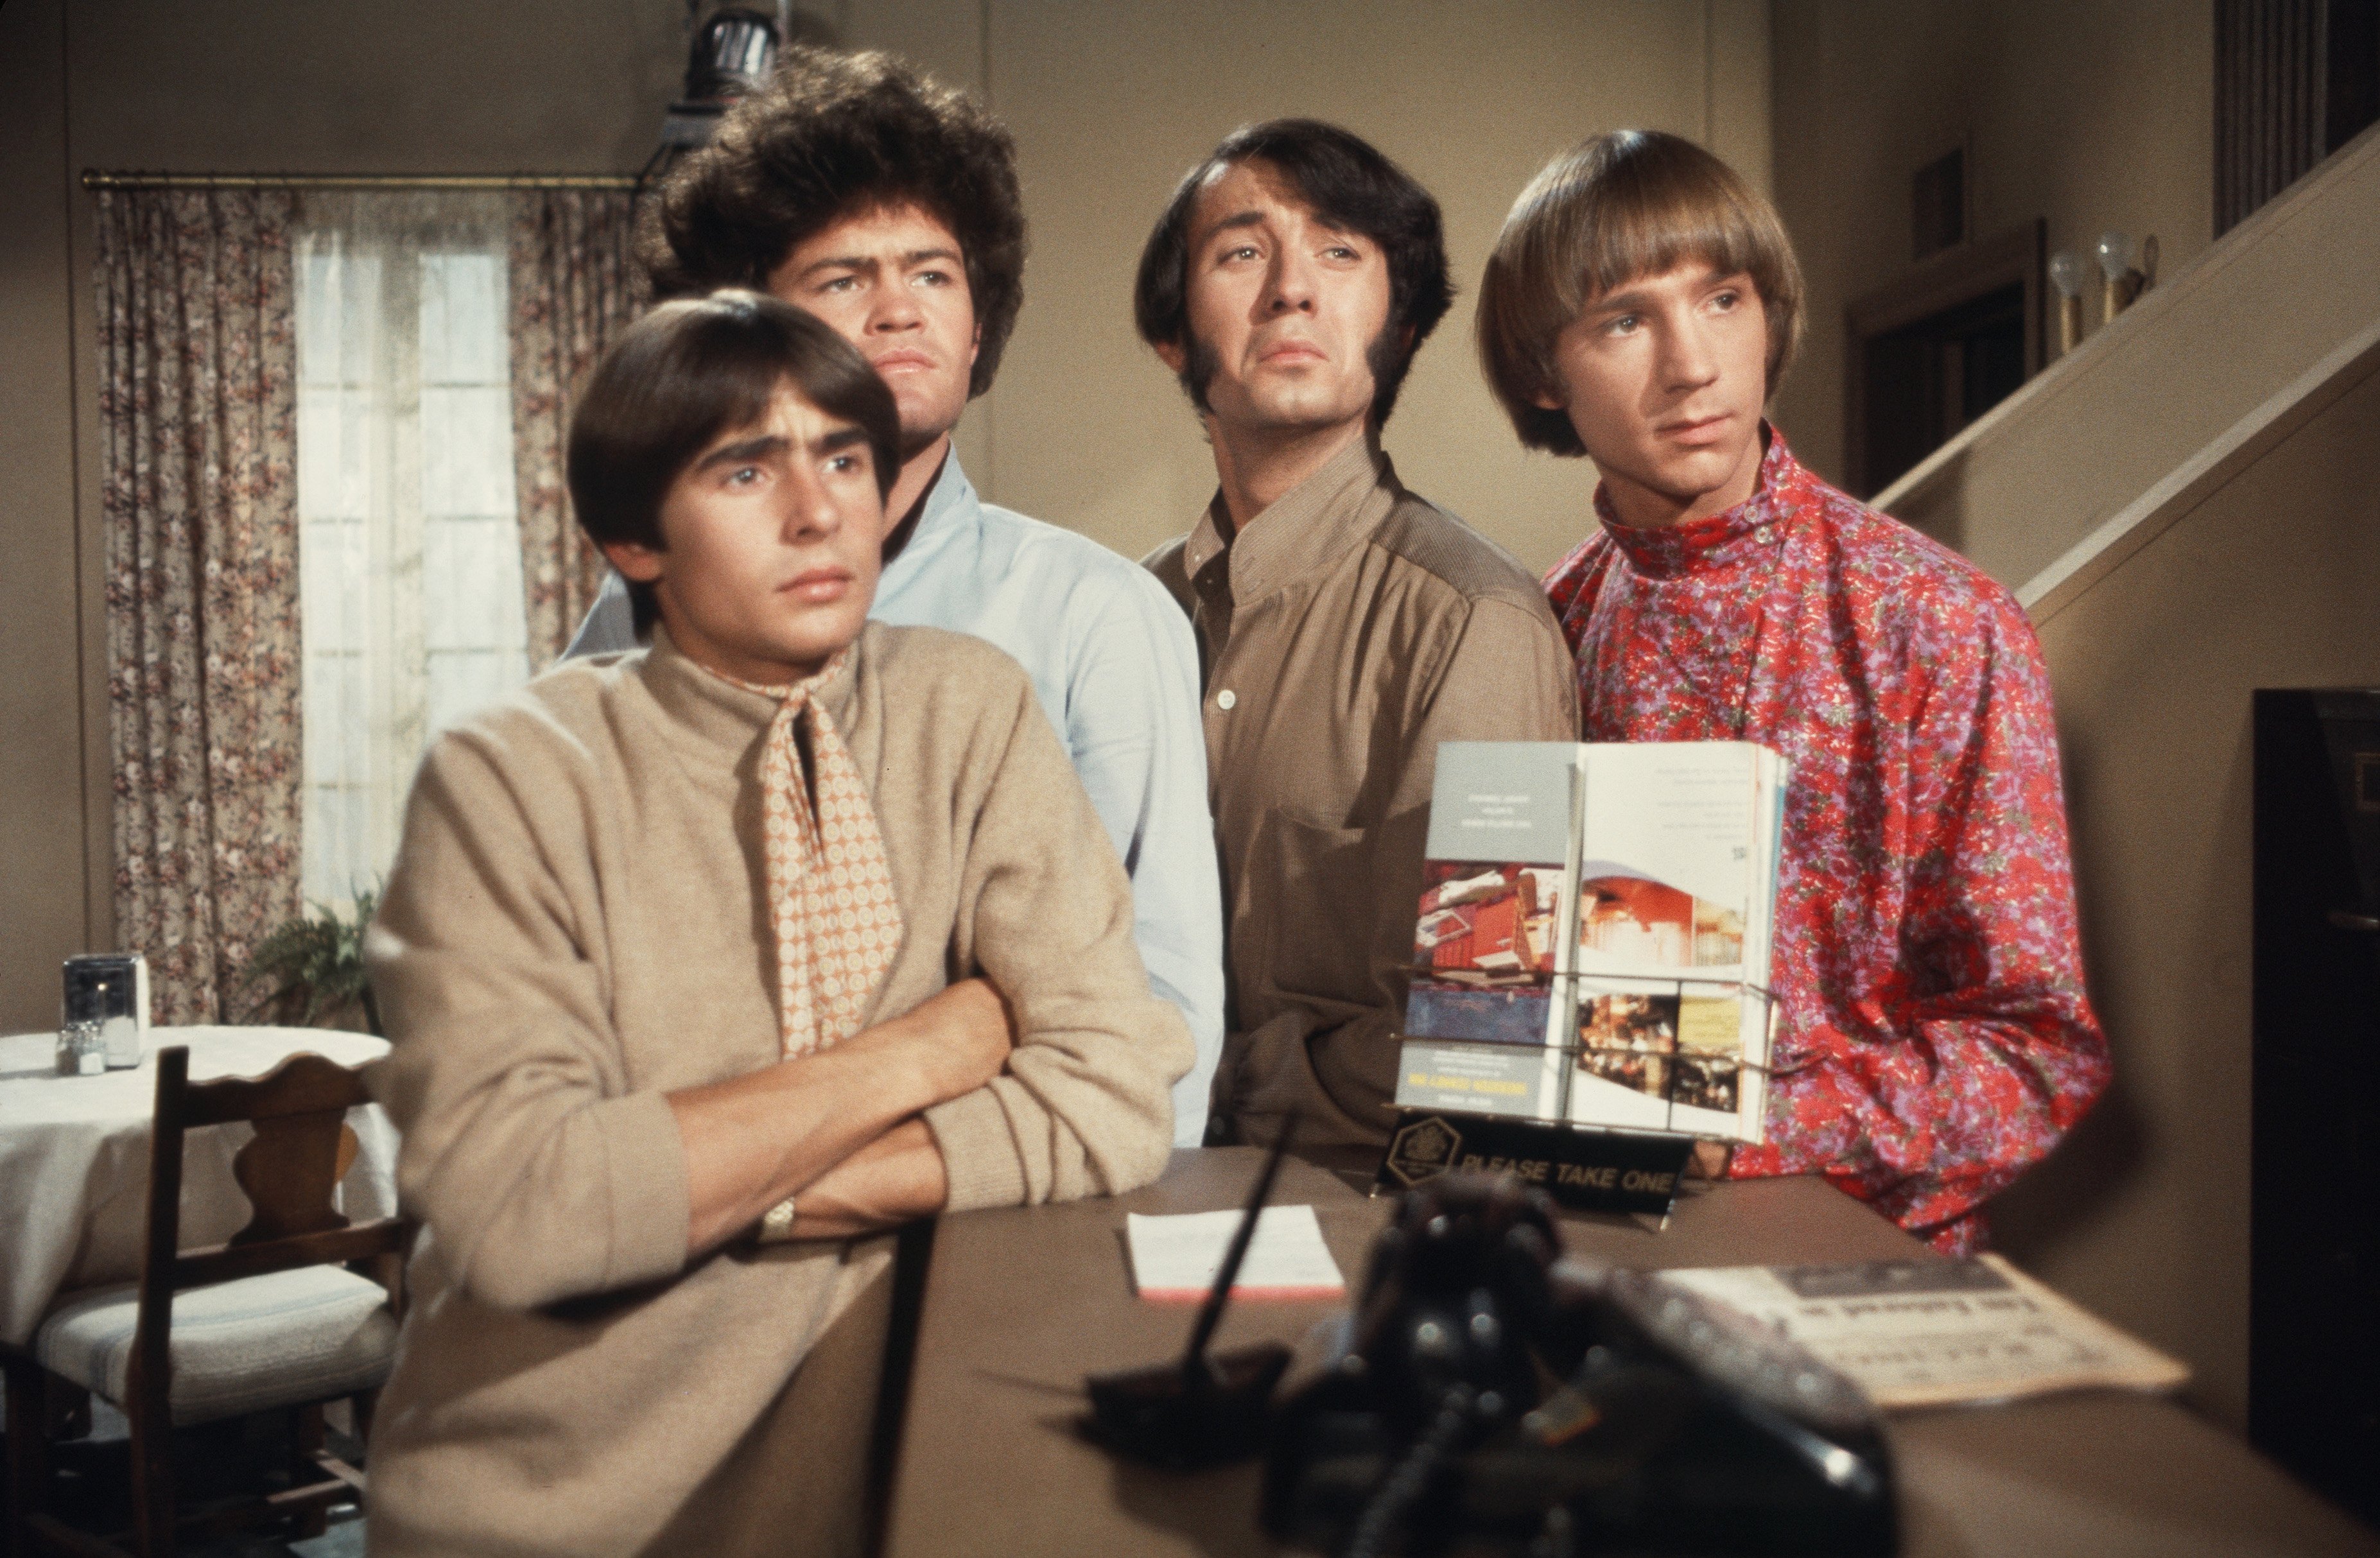 The Monkees' Davy Jones, Micky Dolenz, Mike Nesmith, and Peter Tork at a piano